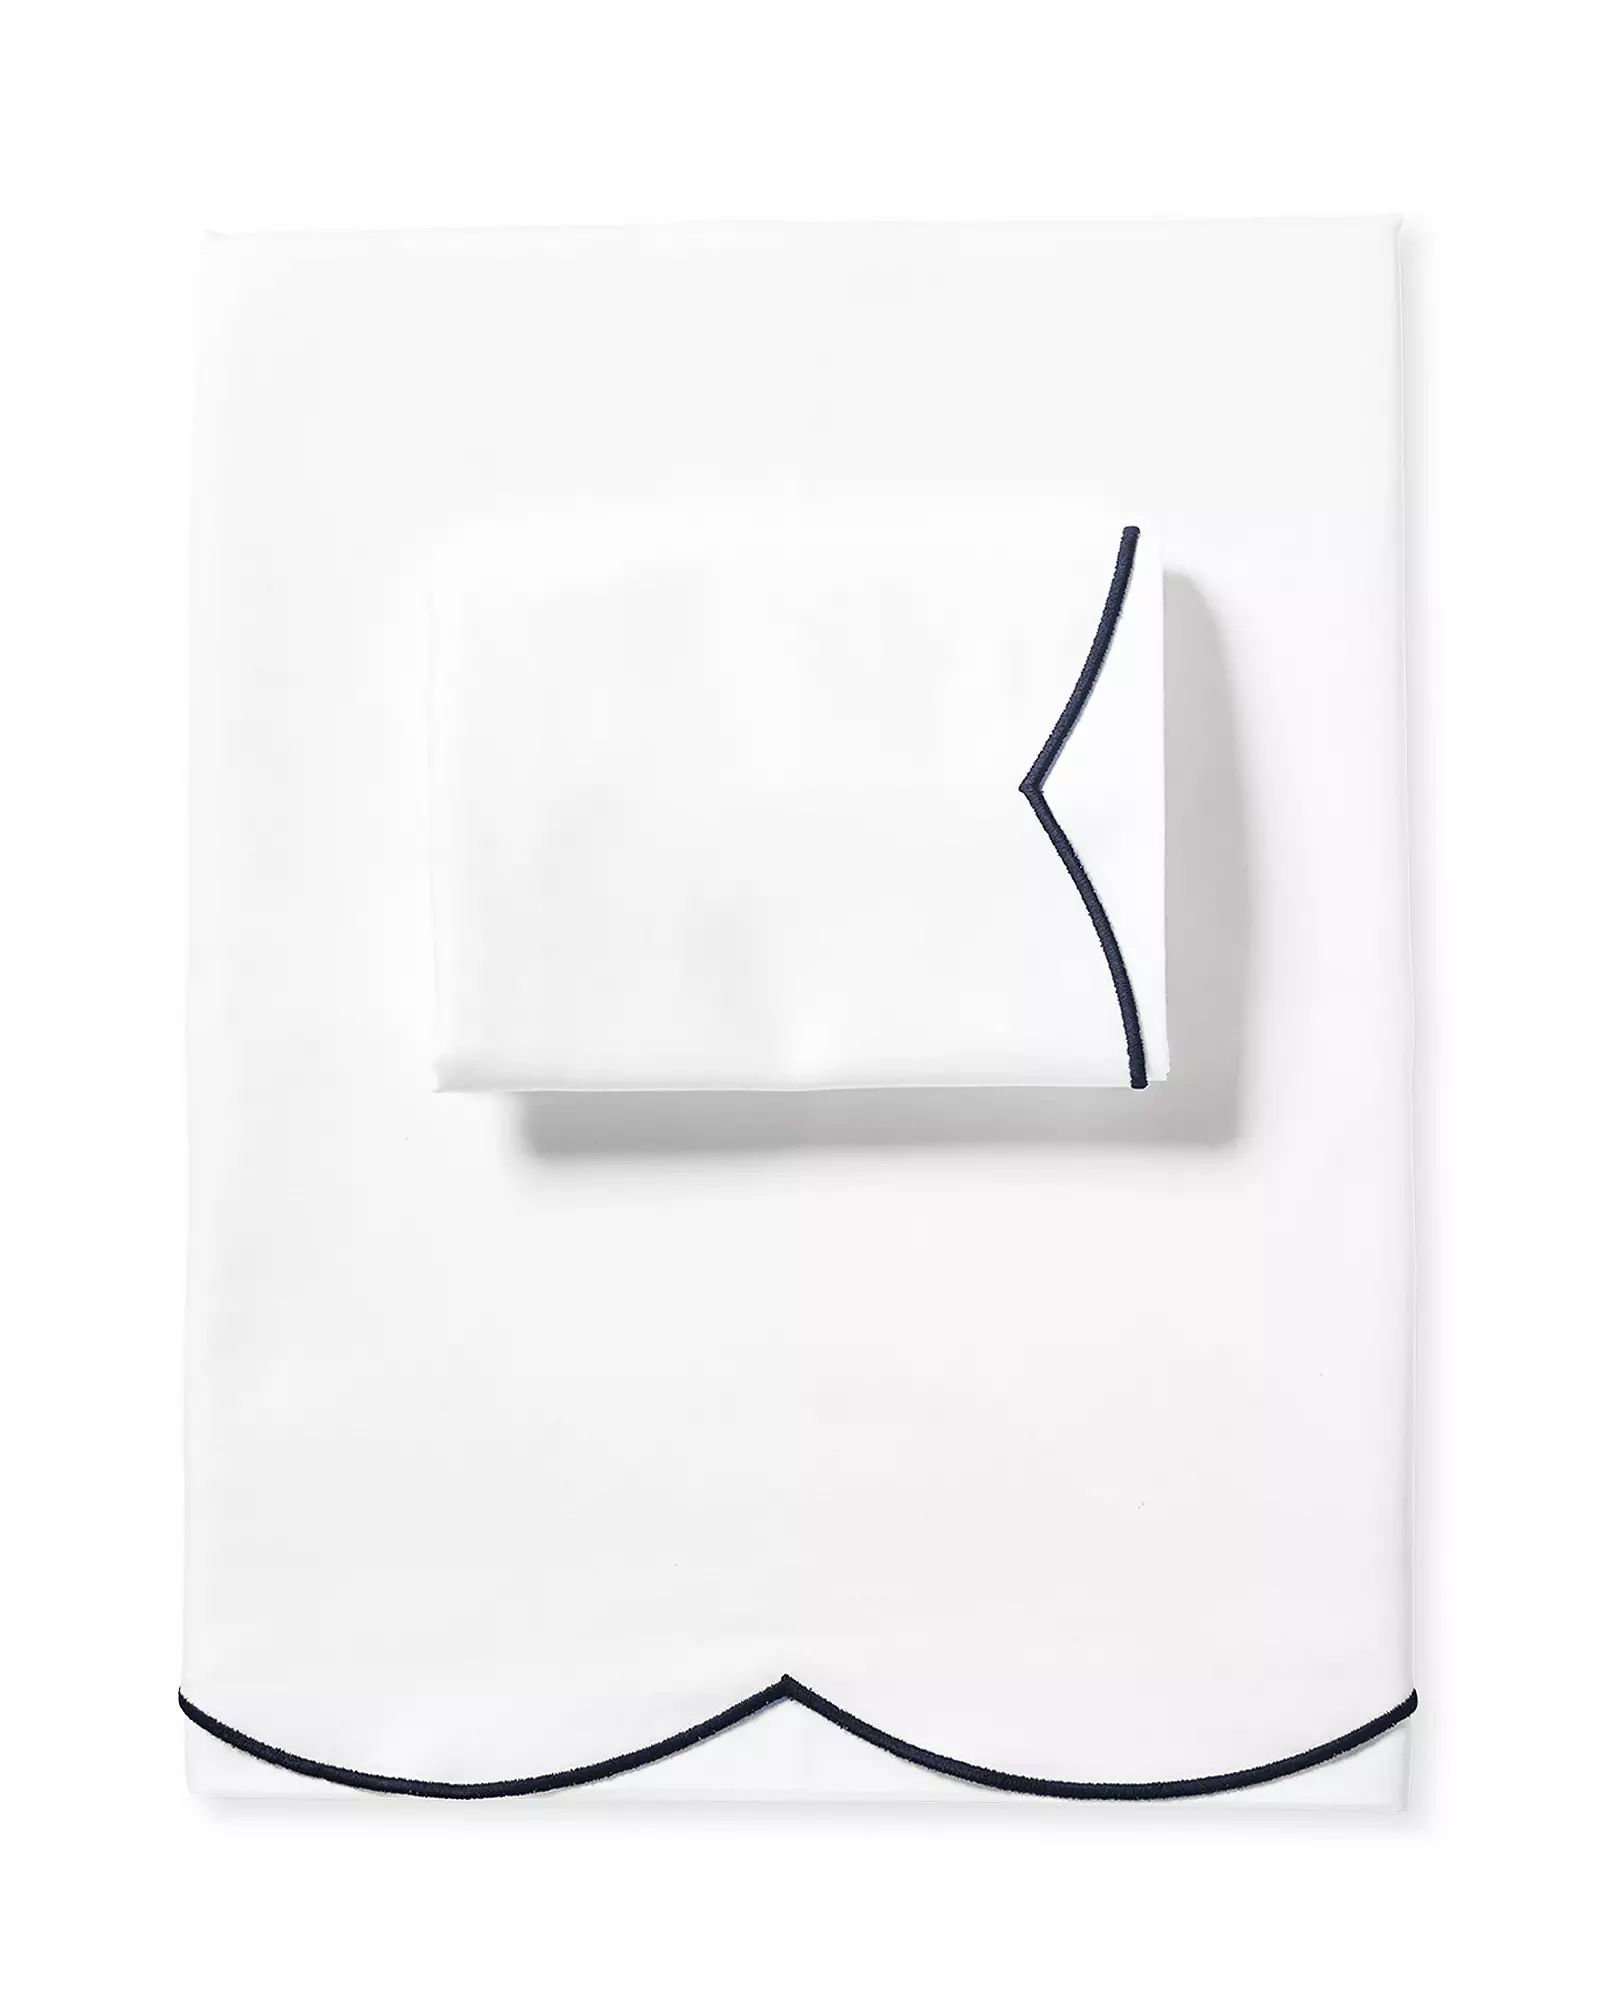 Scallop Sateen Sheet Set | Serena and Lily